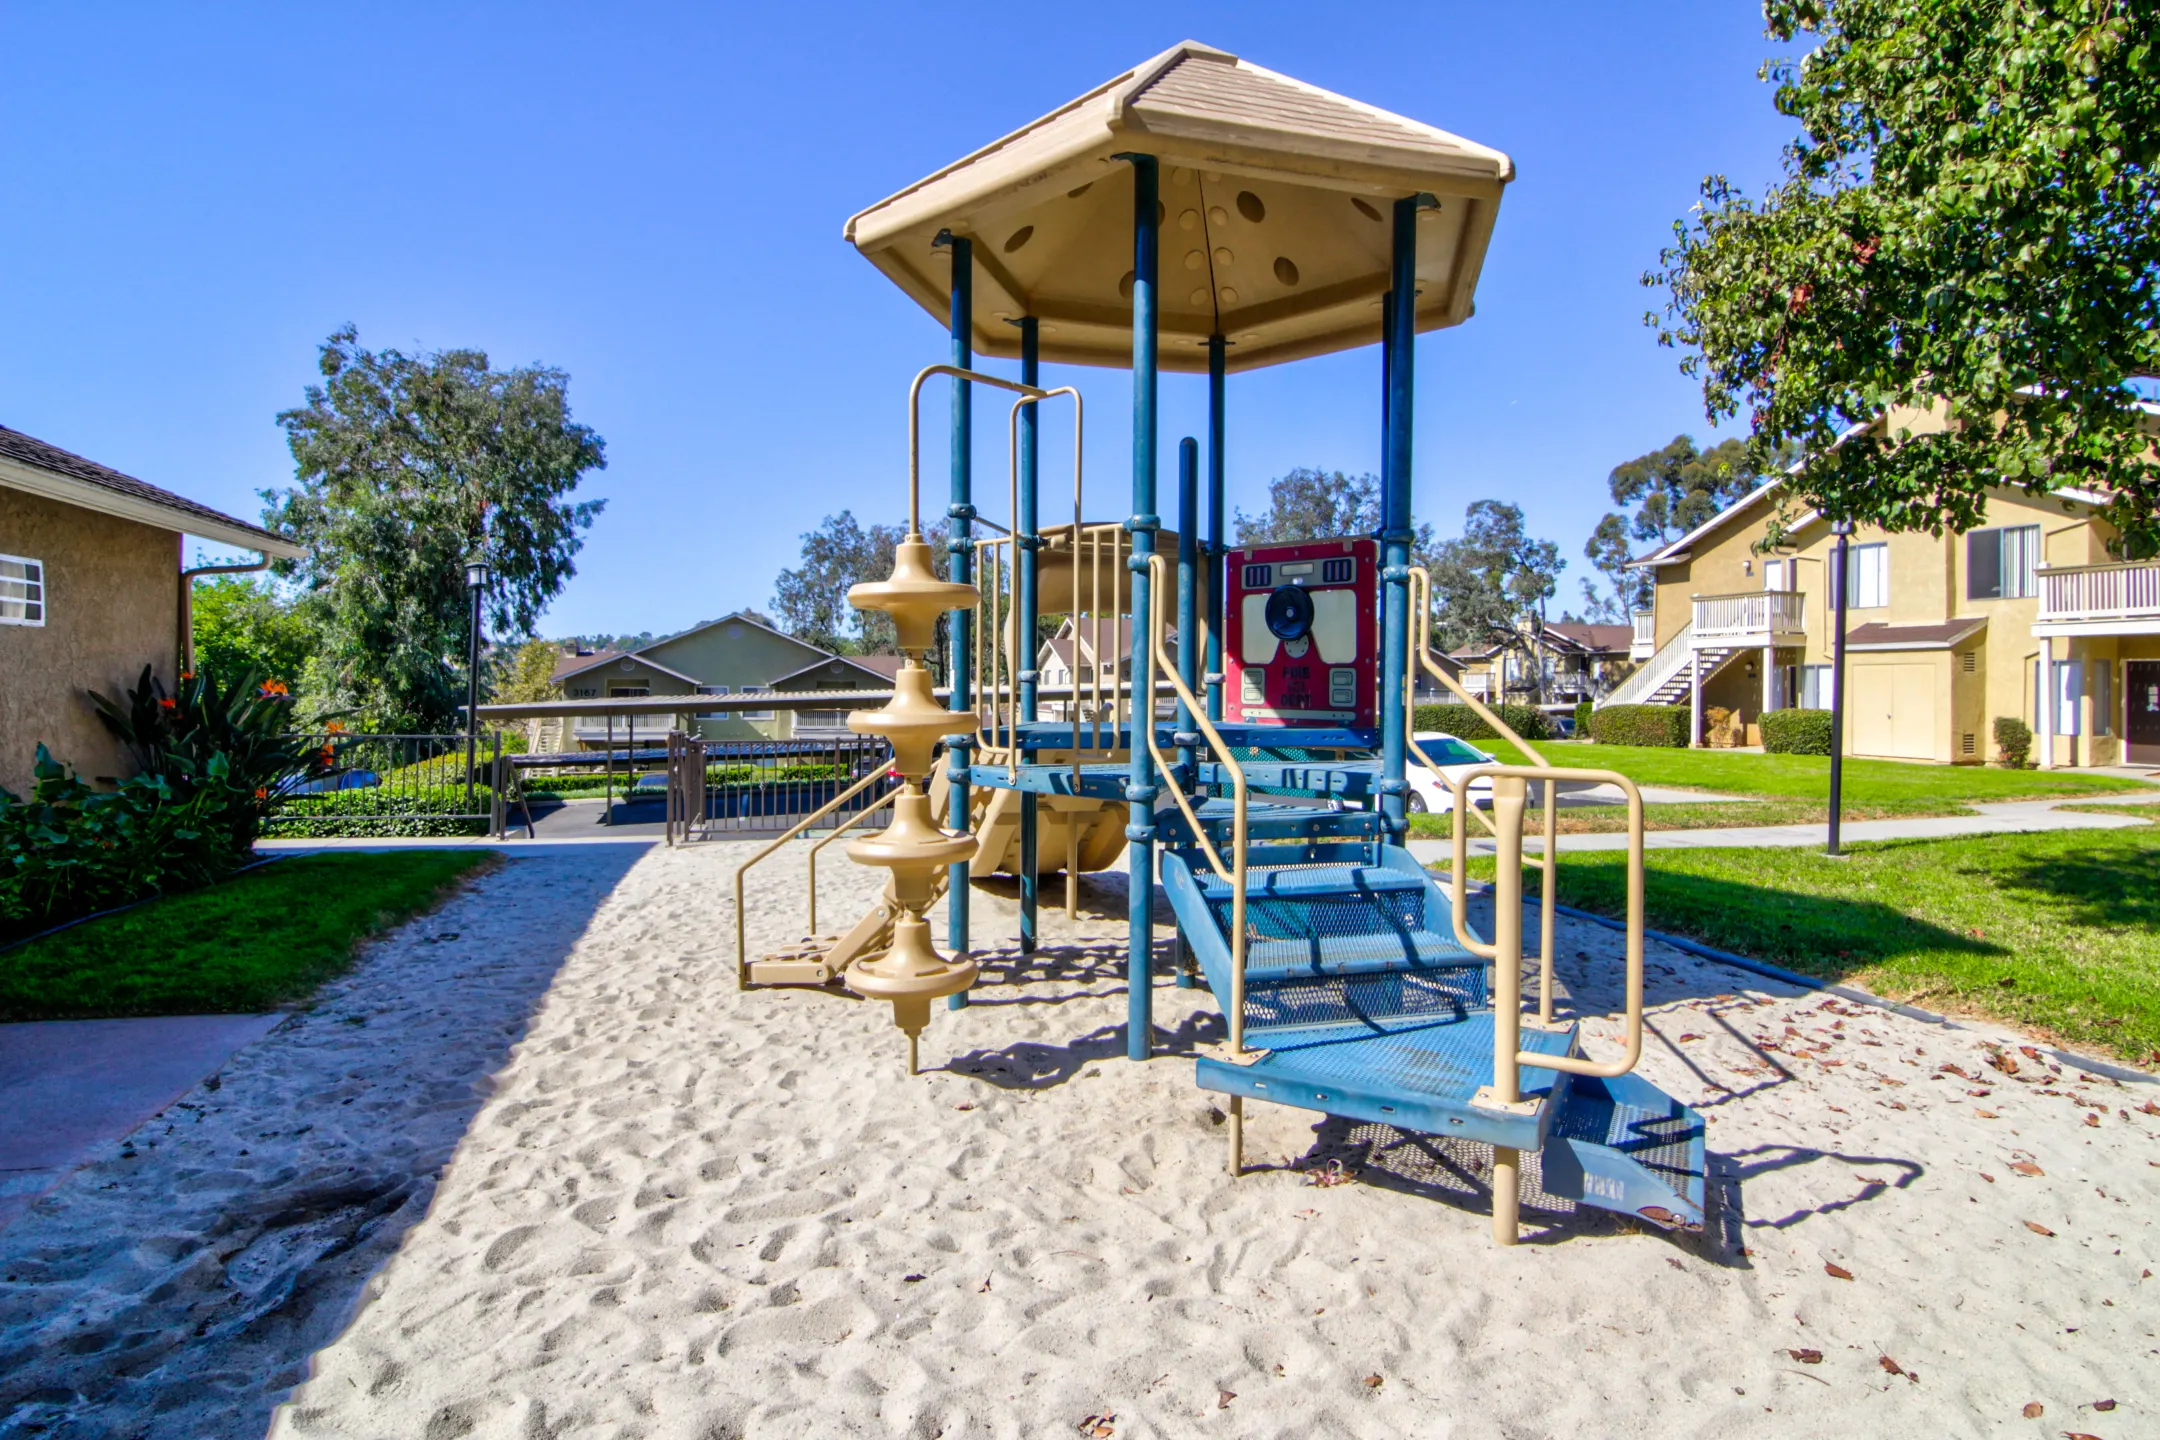 Playground - Lakeview Village - Spring Valley, CA